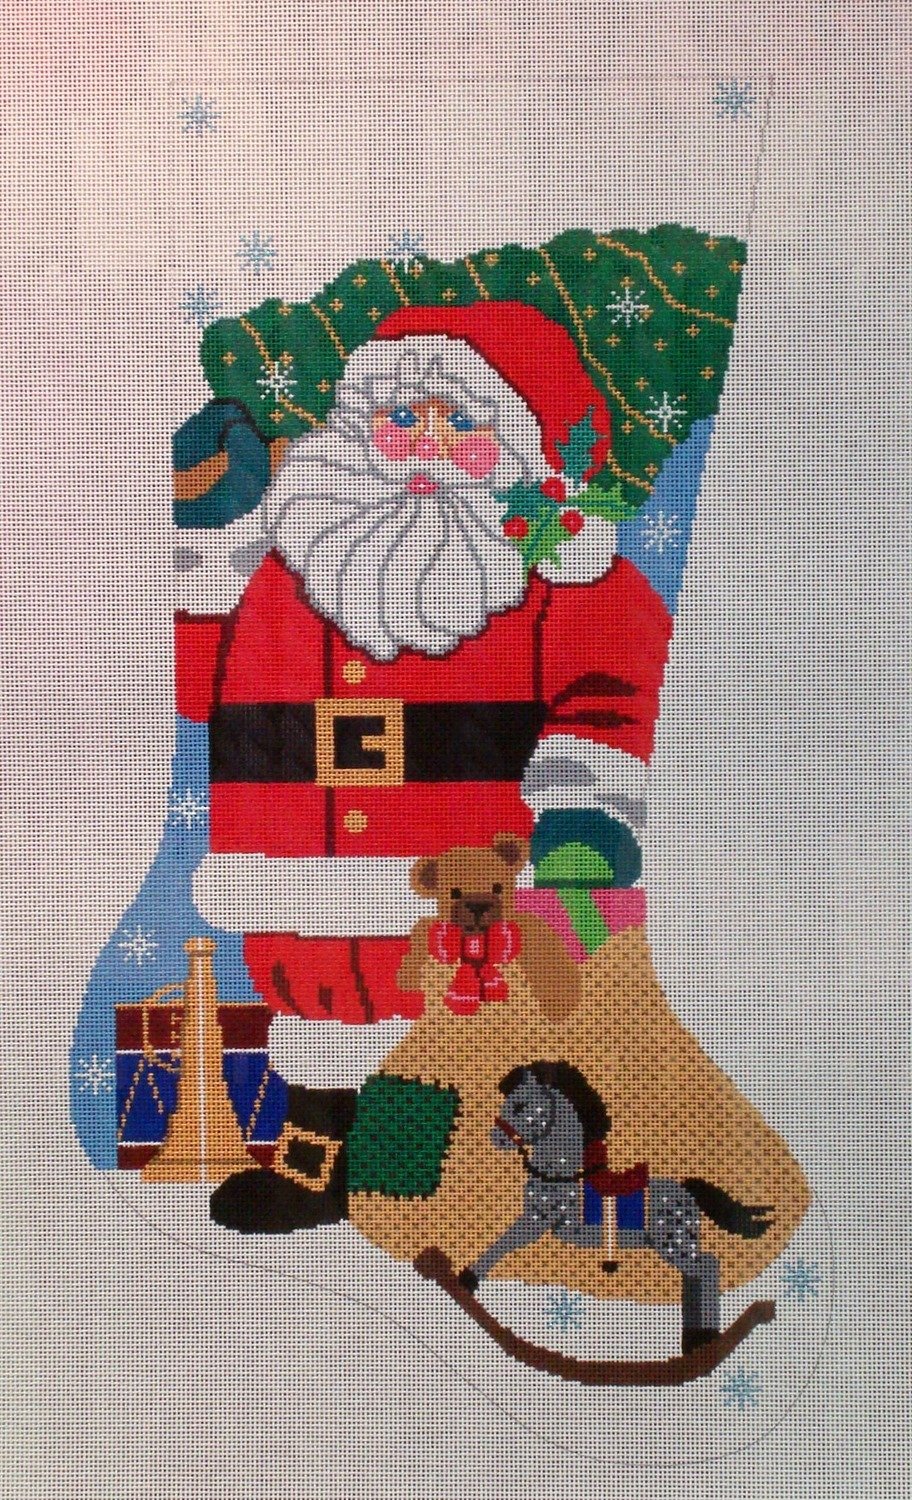 Traditional Santa Stocking (Handpainted by Shelly Tribbey Designs)